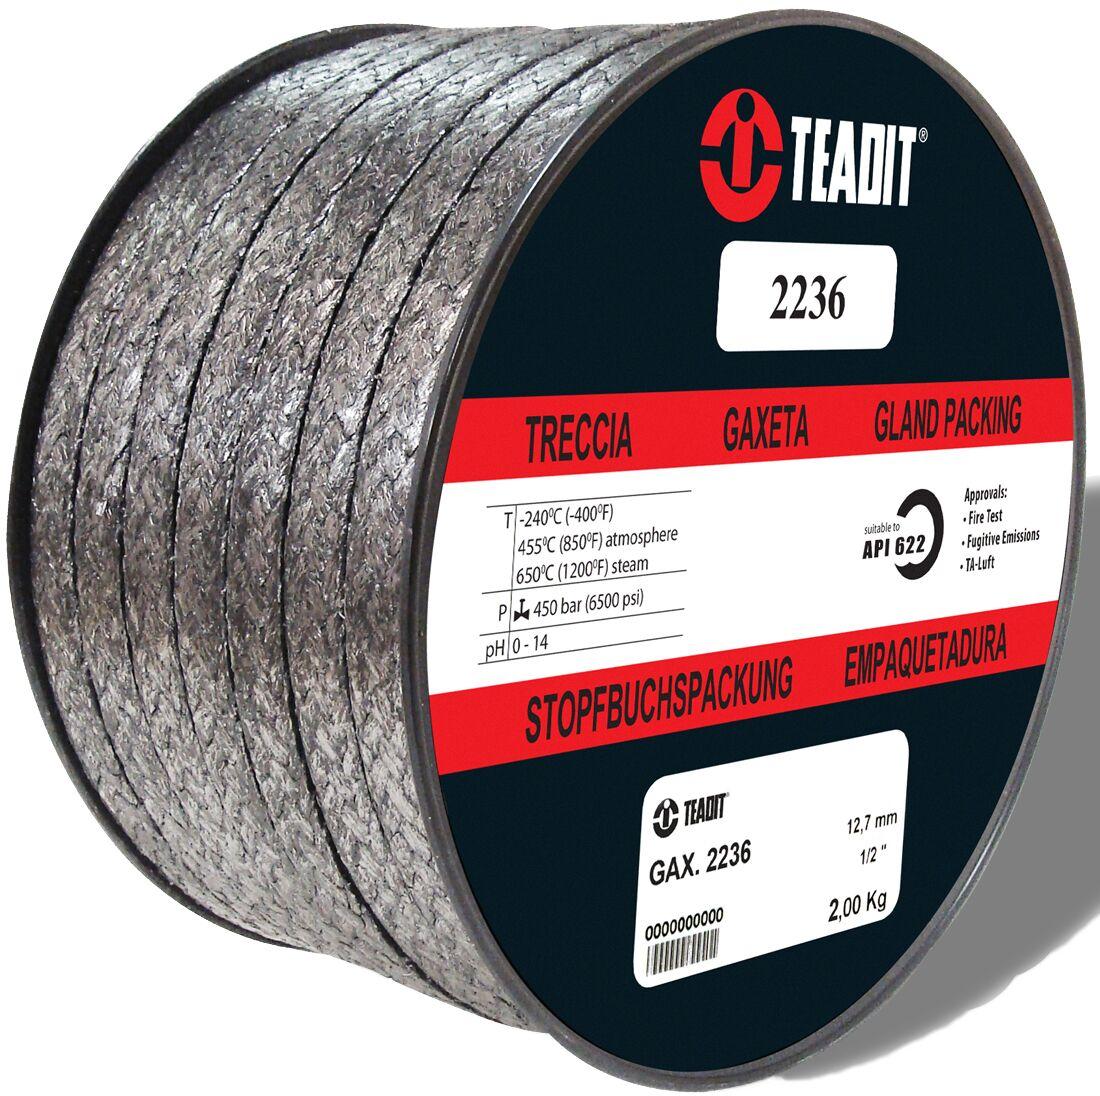 STYLE 2236 Flexible Graphite with Inconel Wire, Low Emission